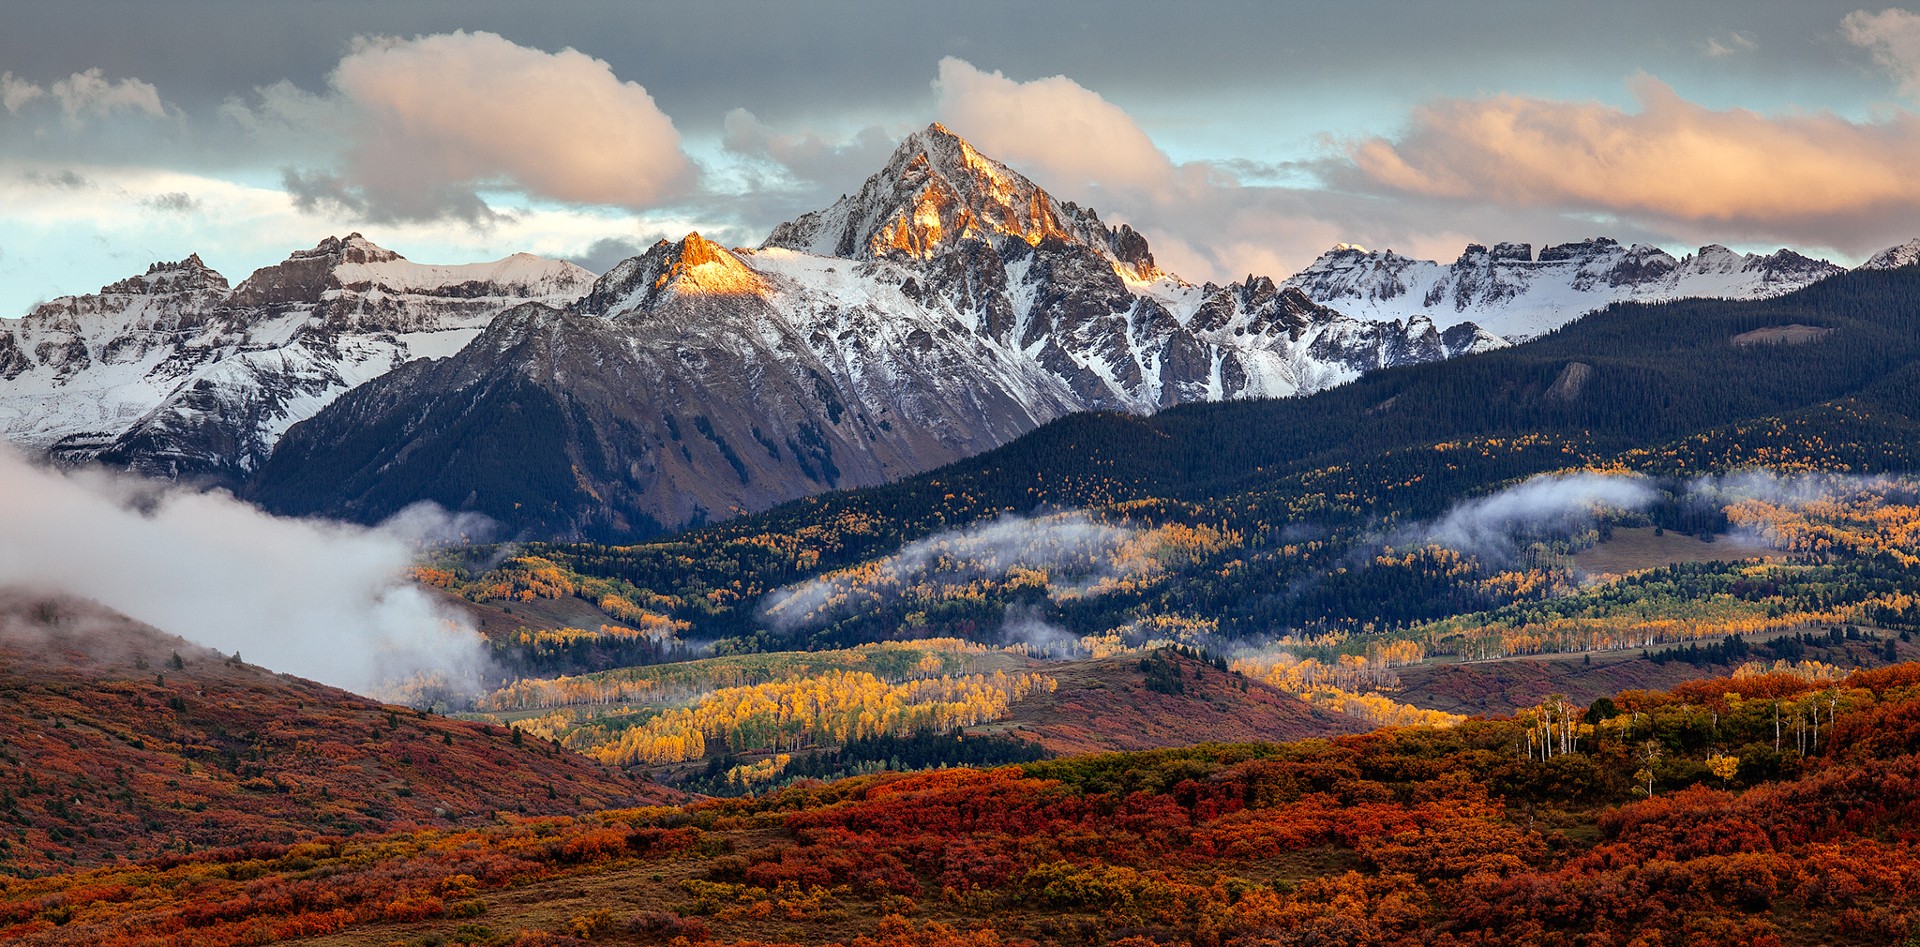 General 1920x947 mountains Colorado landscape valley fall forest Rocky Mountains snowy mountain red leaves USA nature